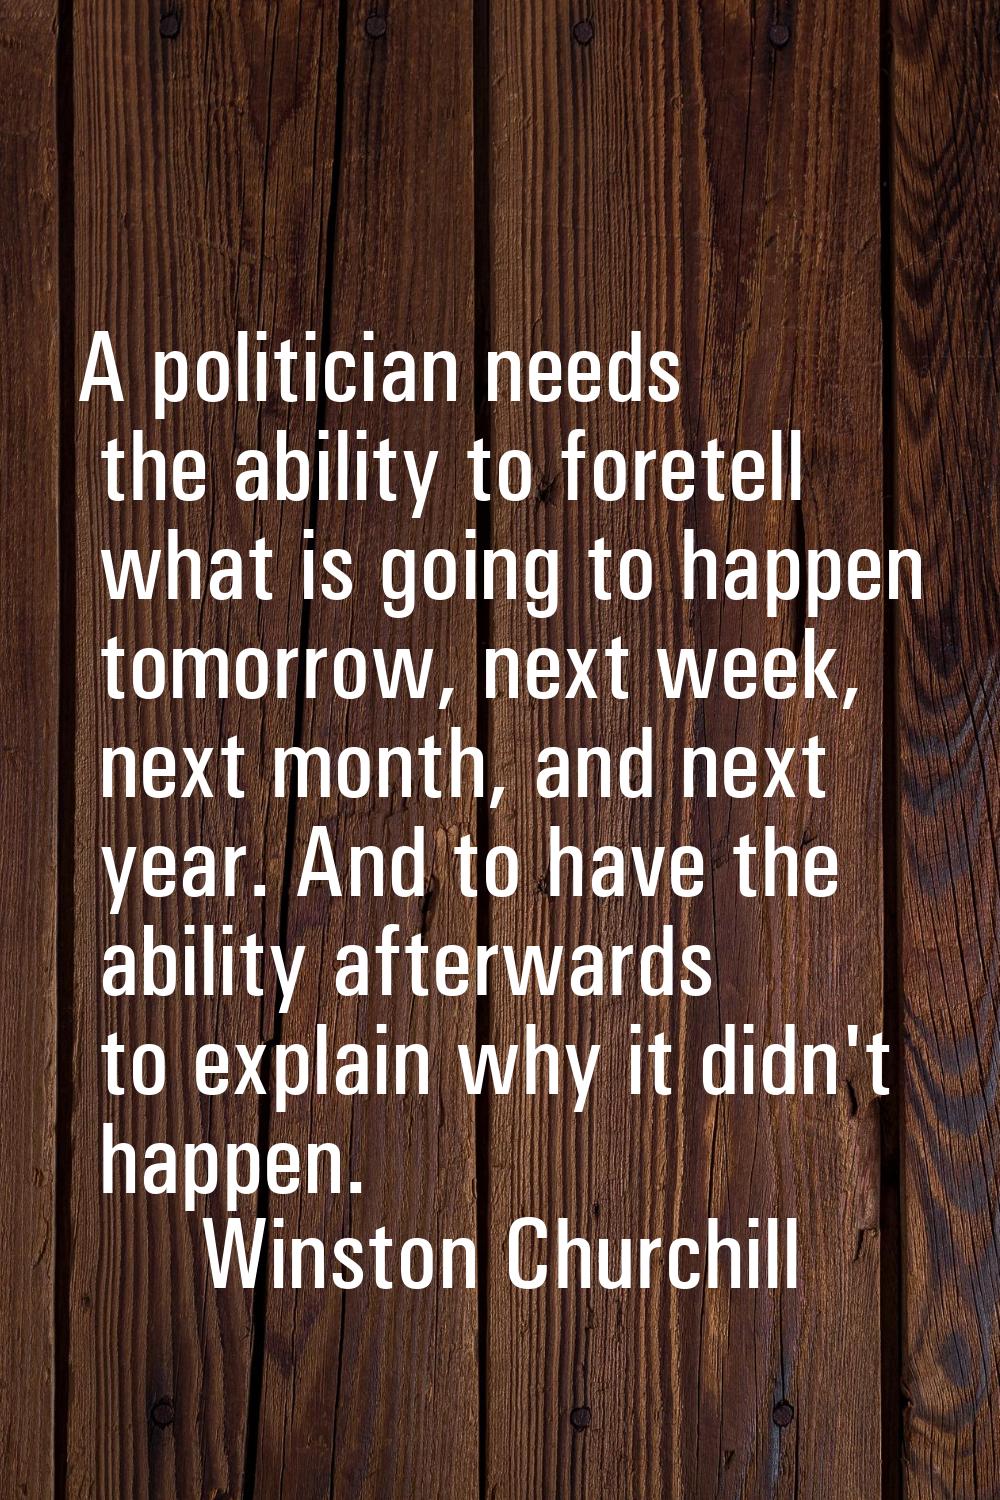 A politician needs the ability to foretell what is going to happen tomorrow, next week, next month,